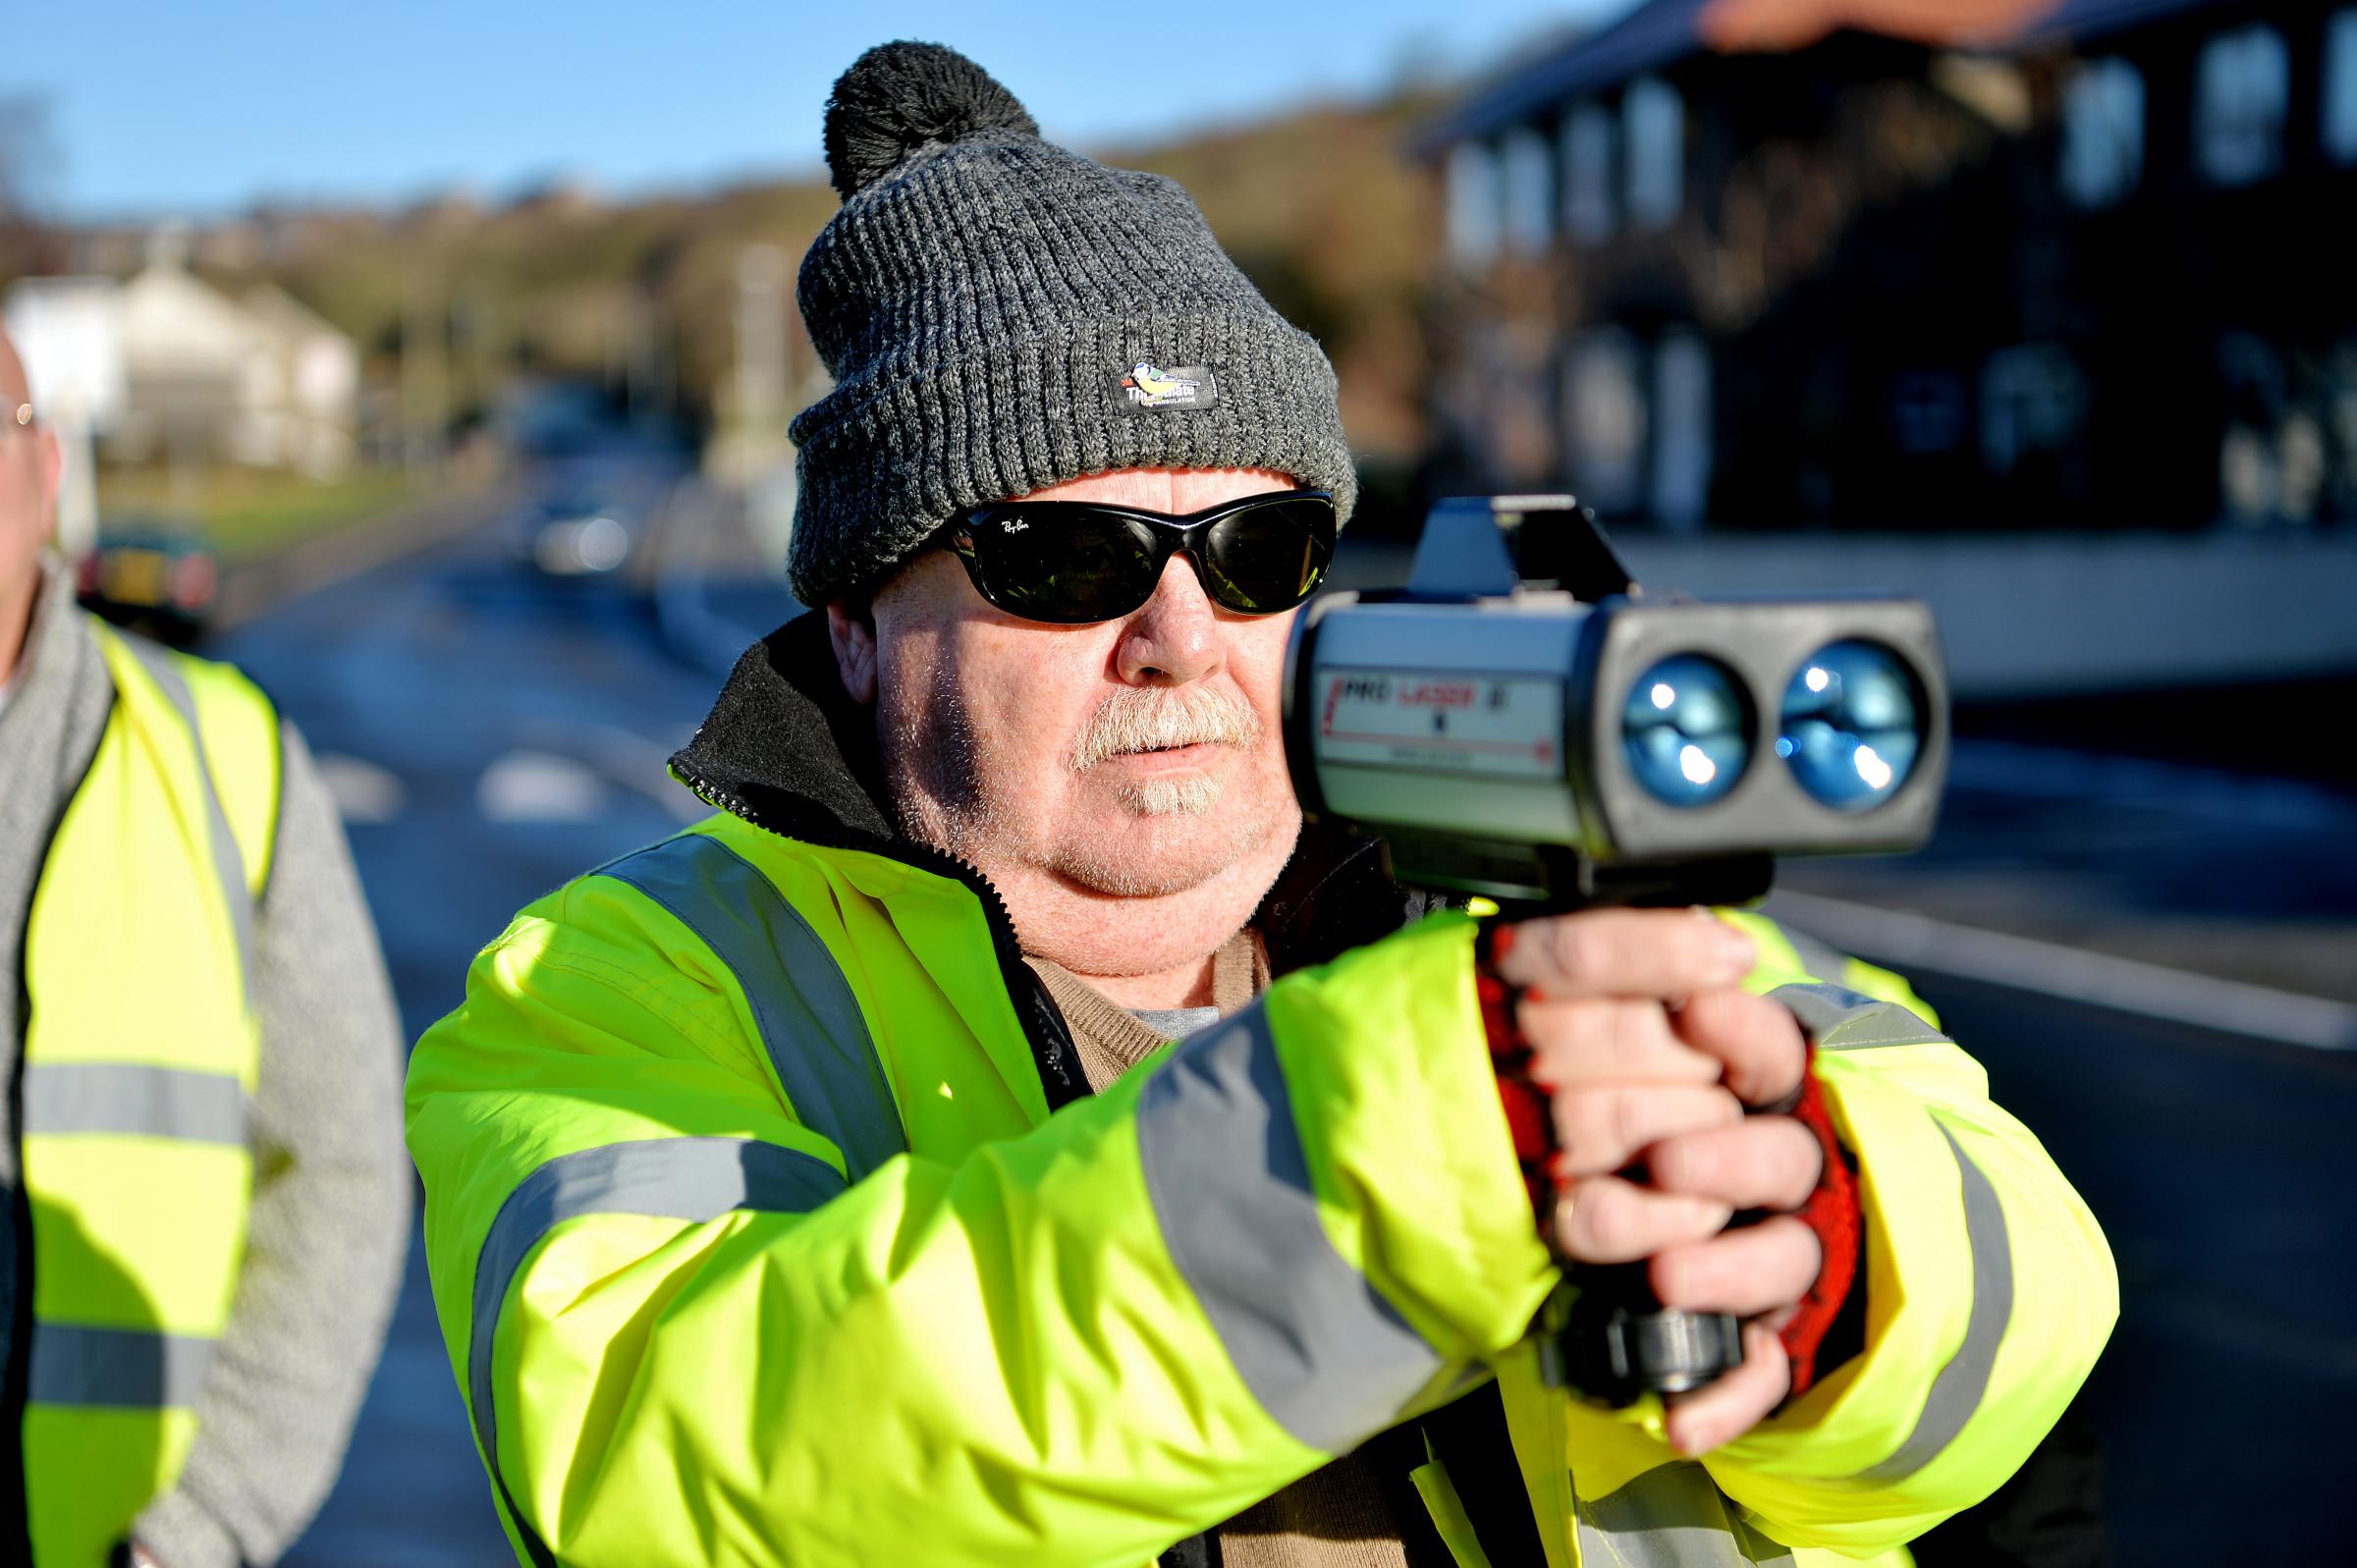 Community volunteers with speed cameras could help police catch motorists